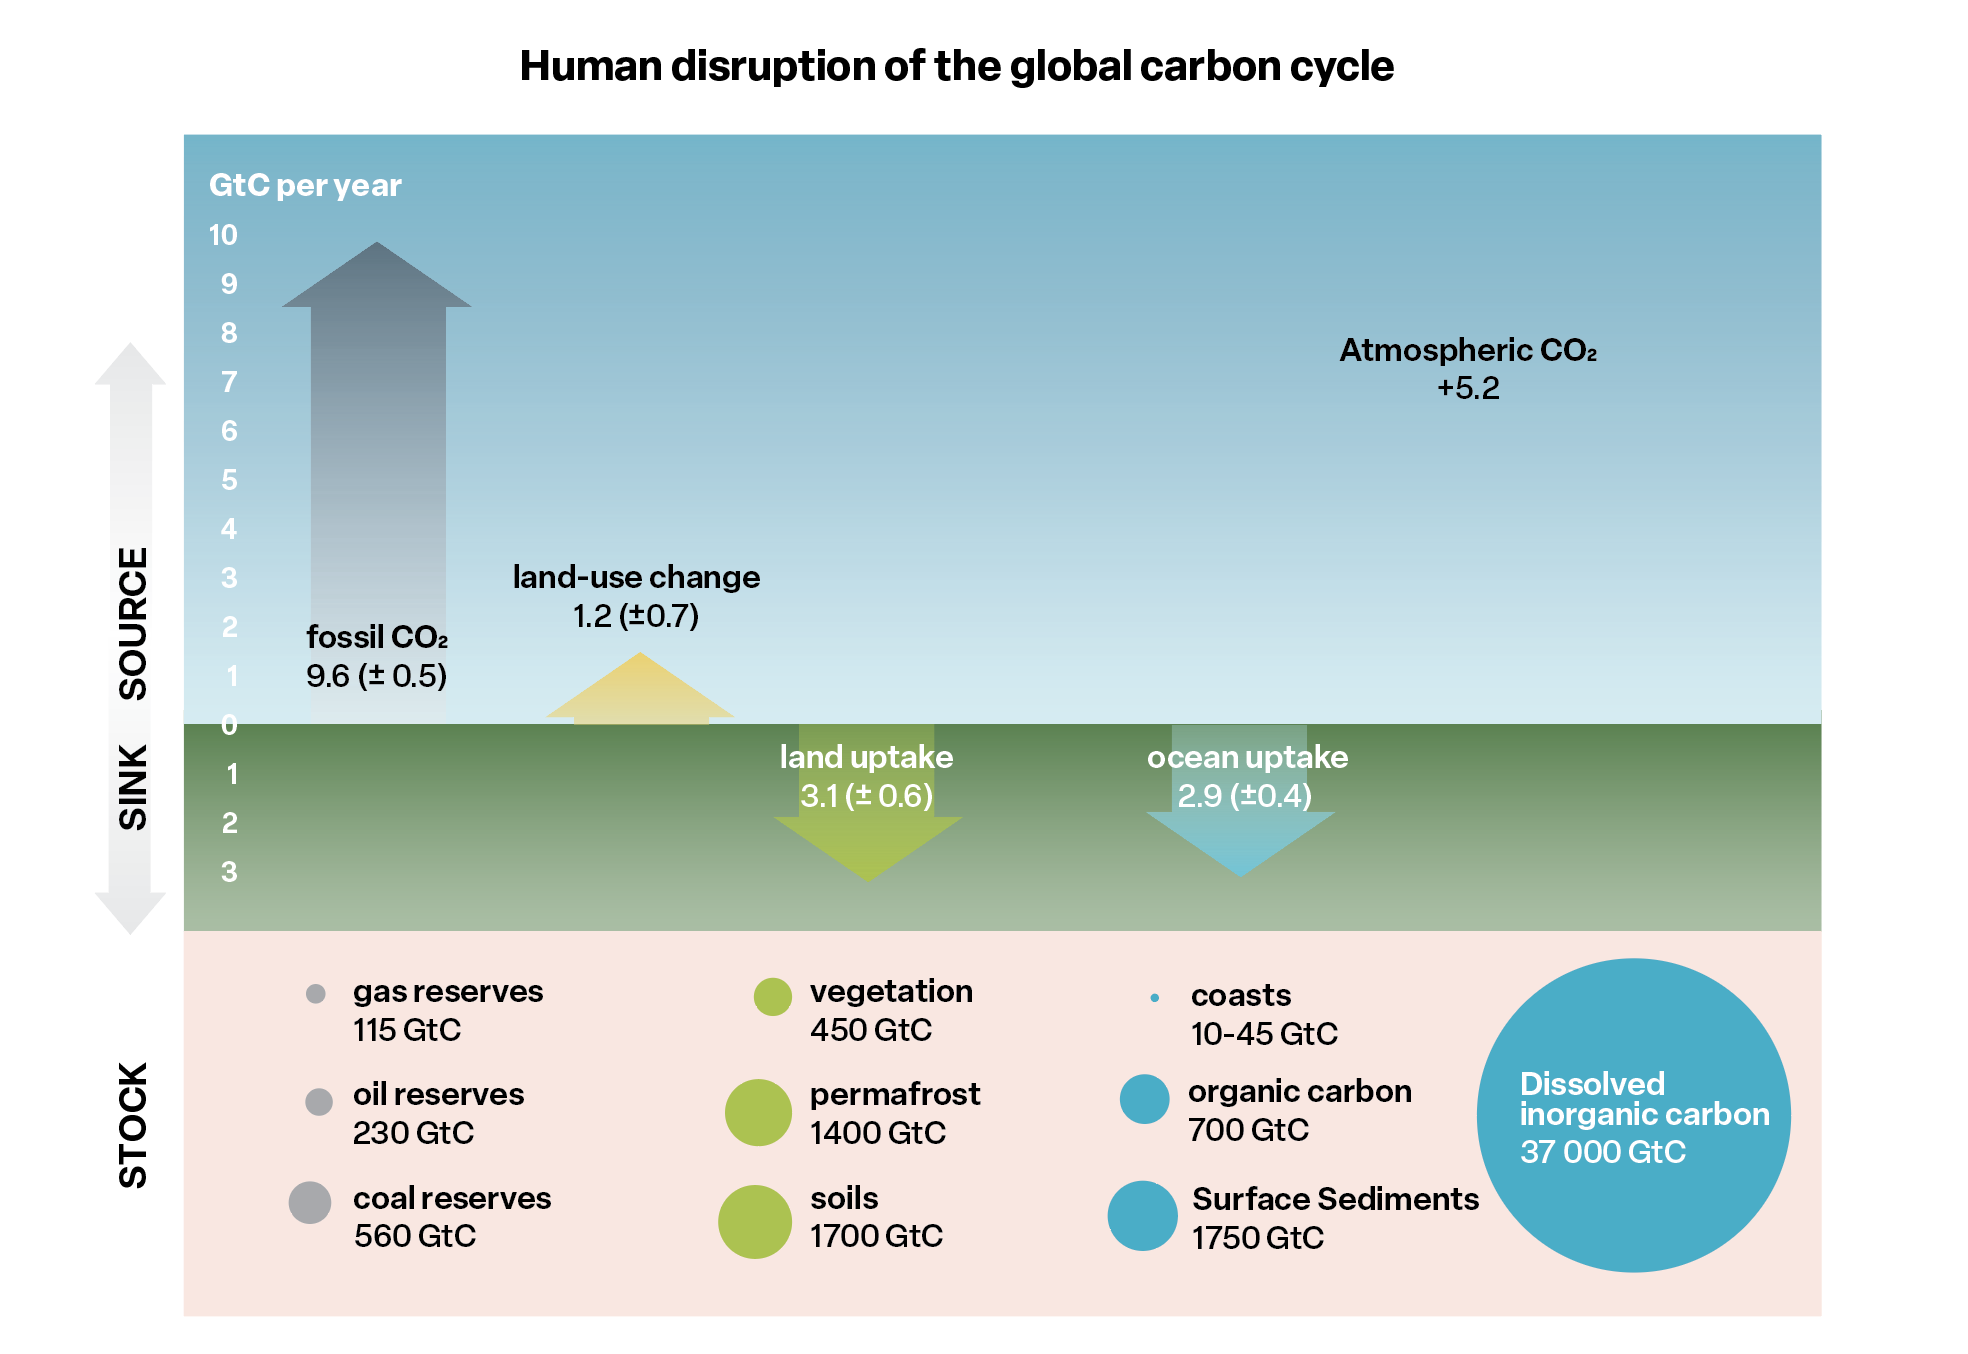 Figure 1.  Average human influence in the global carbon cyclein GtC per year, gigatonnes of carbon, for the decade 2012-2021. adapted from Global Carbon Project 2022